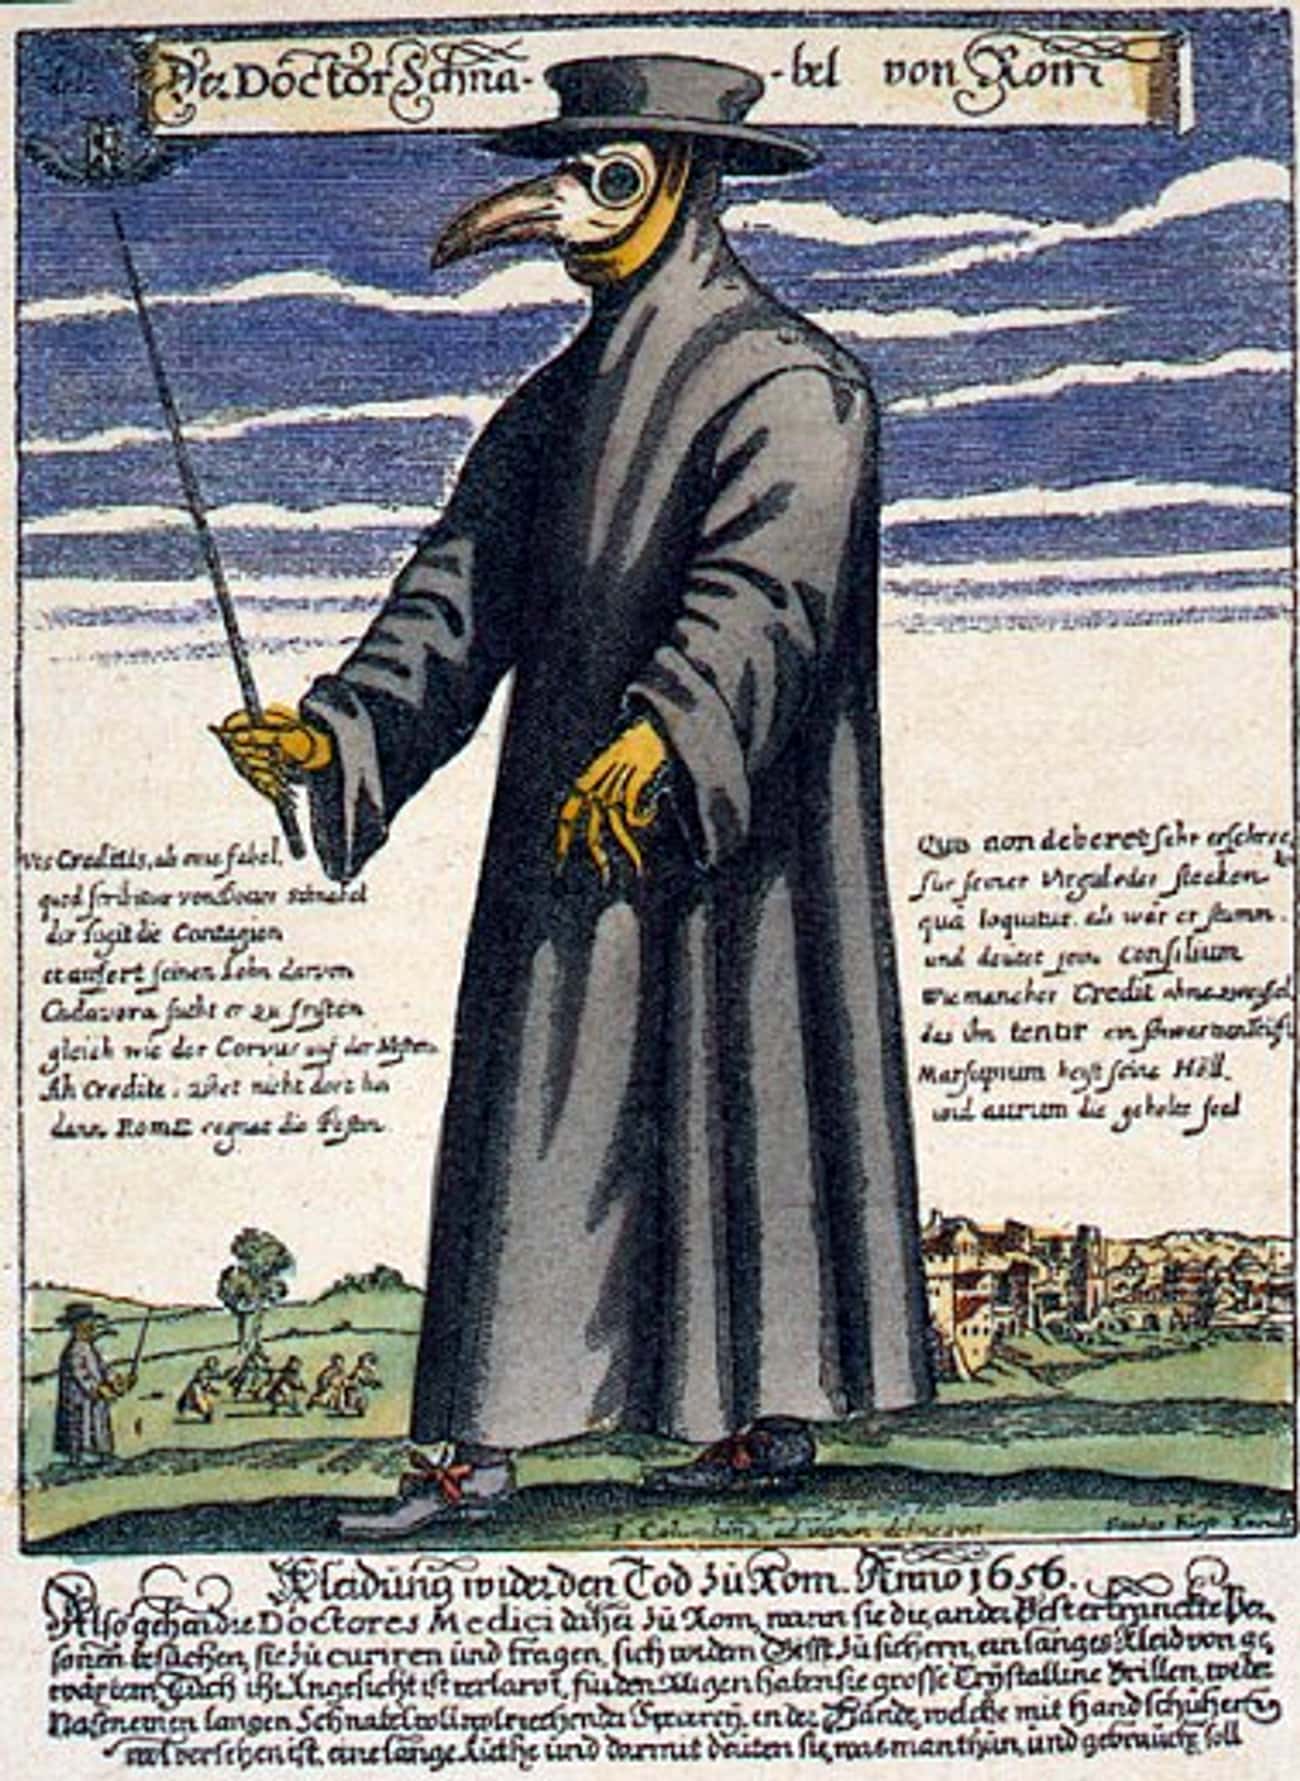 Plague Doctors Started Wearing Those Creepy Outfits Long After The Middle Ages